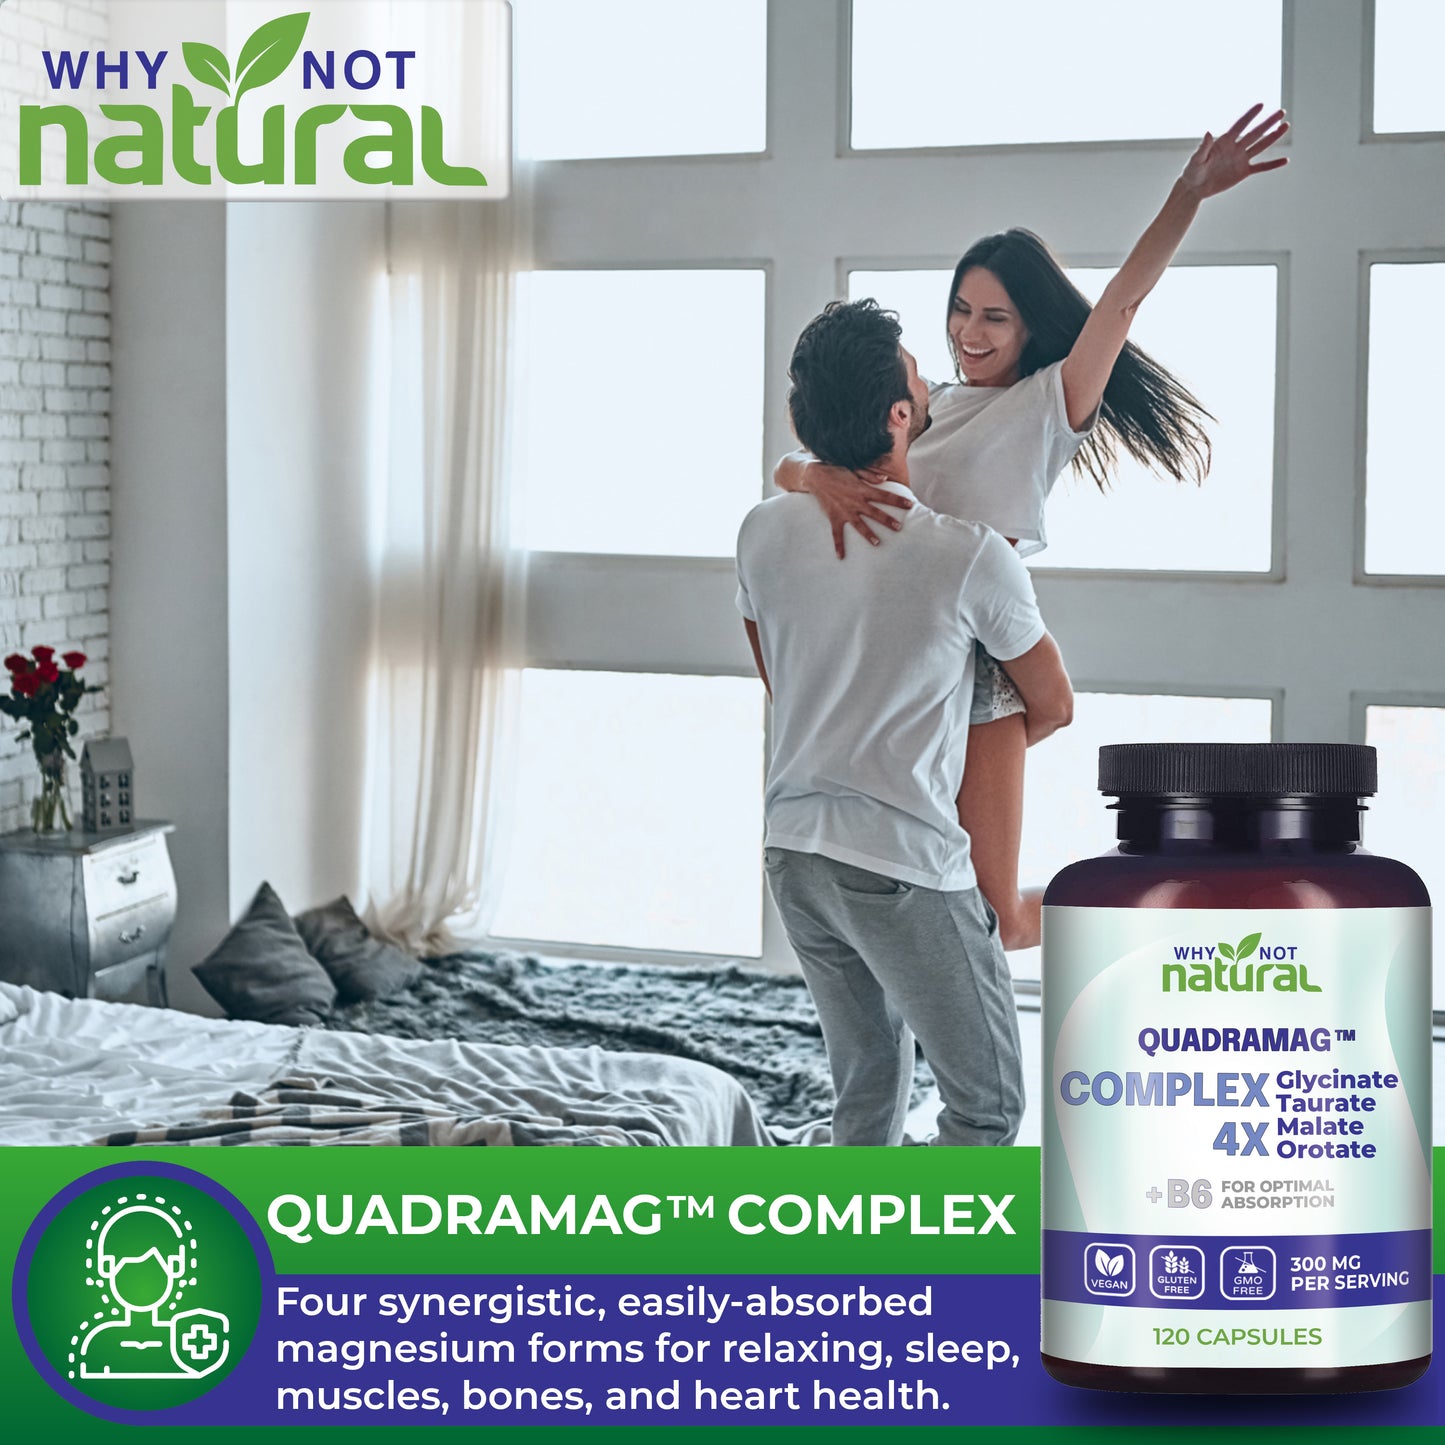 4-in-1 Magnesium Complex Supplement - Glycinate, Orotate, Taurate and Malate blend capsules for Sleep, Calm, heart, muscles and bones support - 300 mg per serving